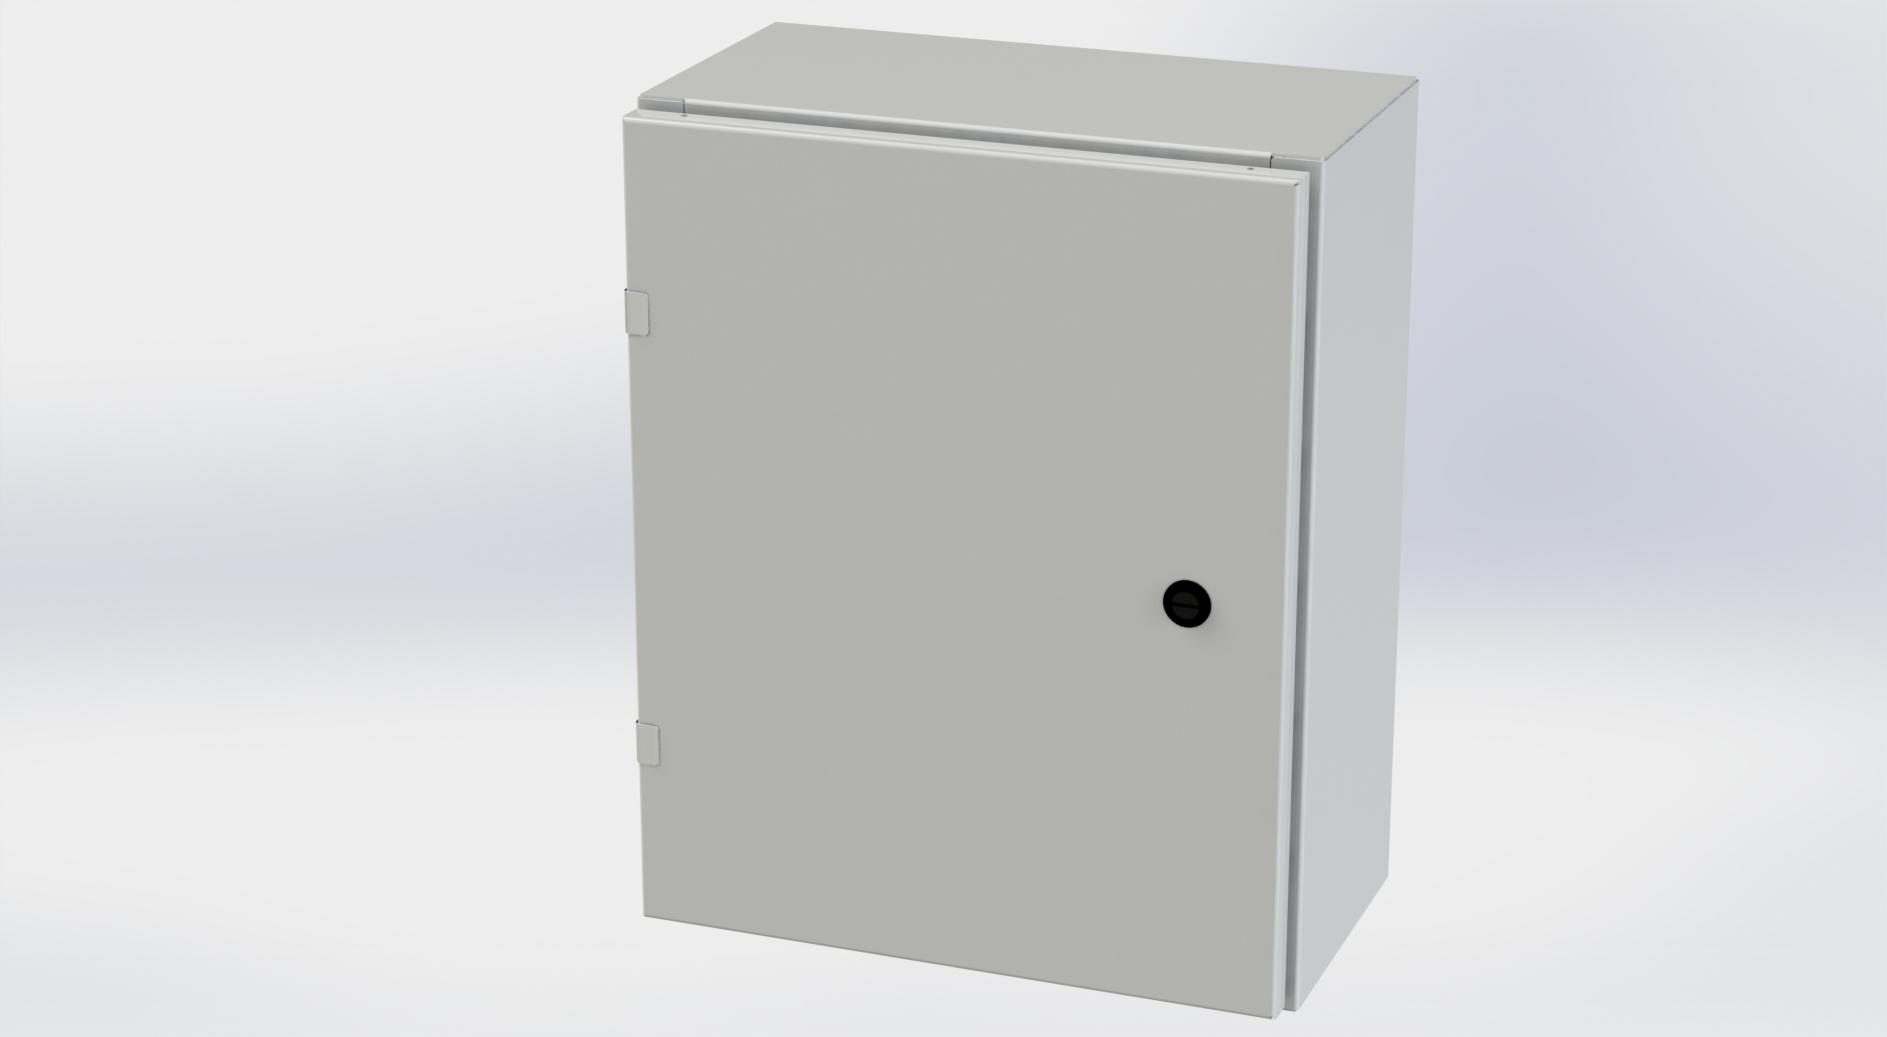 Saginaw Control SCE-20EL1608LPLG EL Enclosure, Height:20.00", Width:16.00", Depth:8.00", RAL 7035 gray powder coating inside and out. Optional sub-panels are powder coated white.